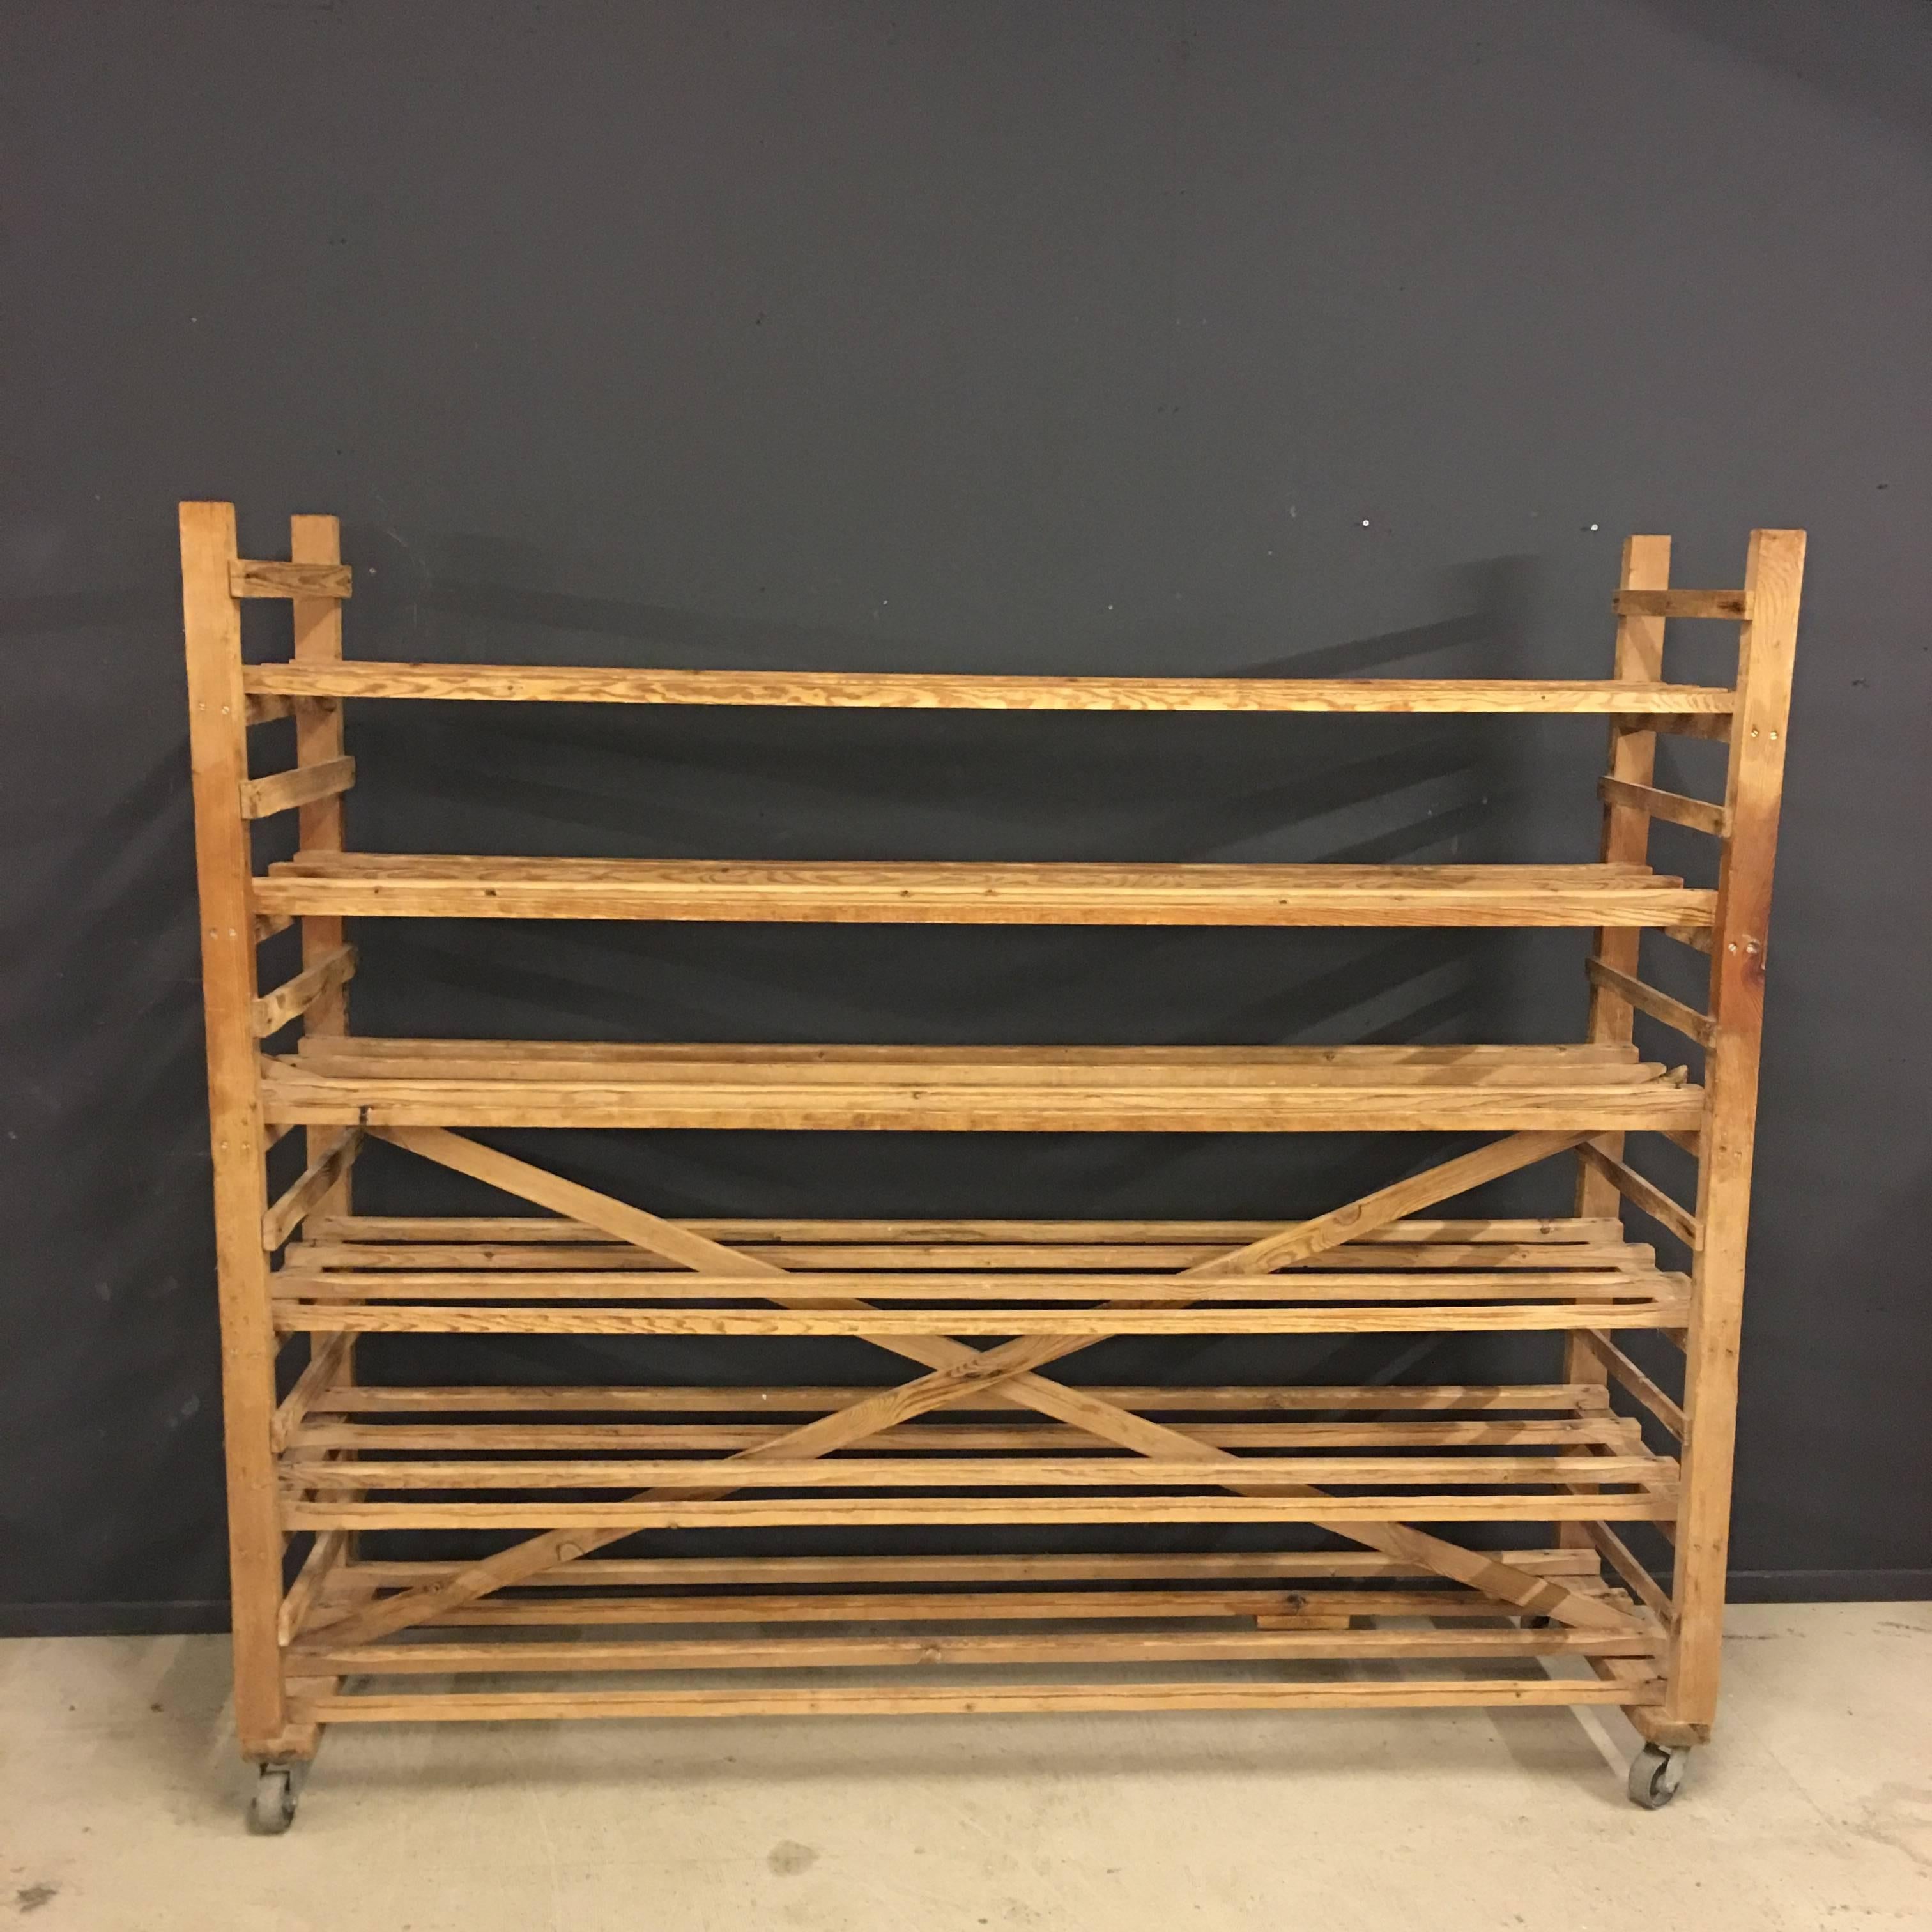 This wooden bakery rack was manufactured in Belgium during 1940s. Made of pinewood.
 